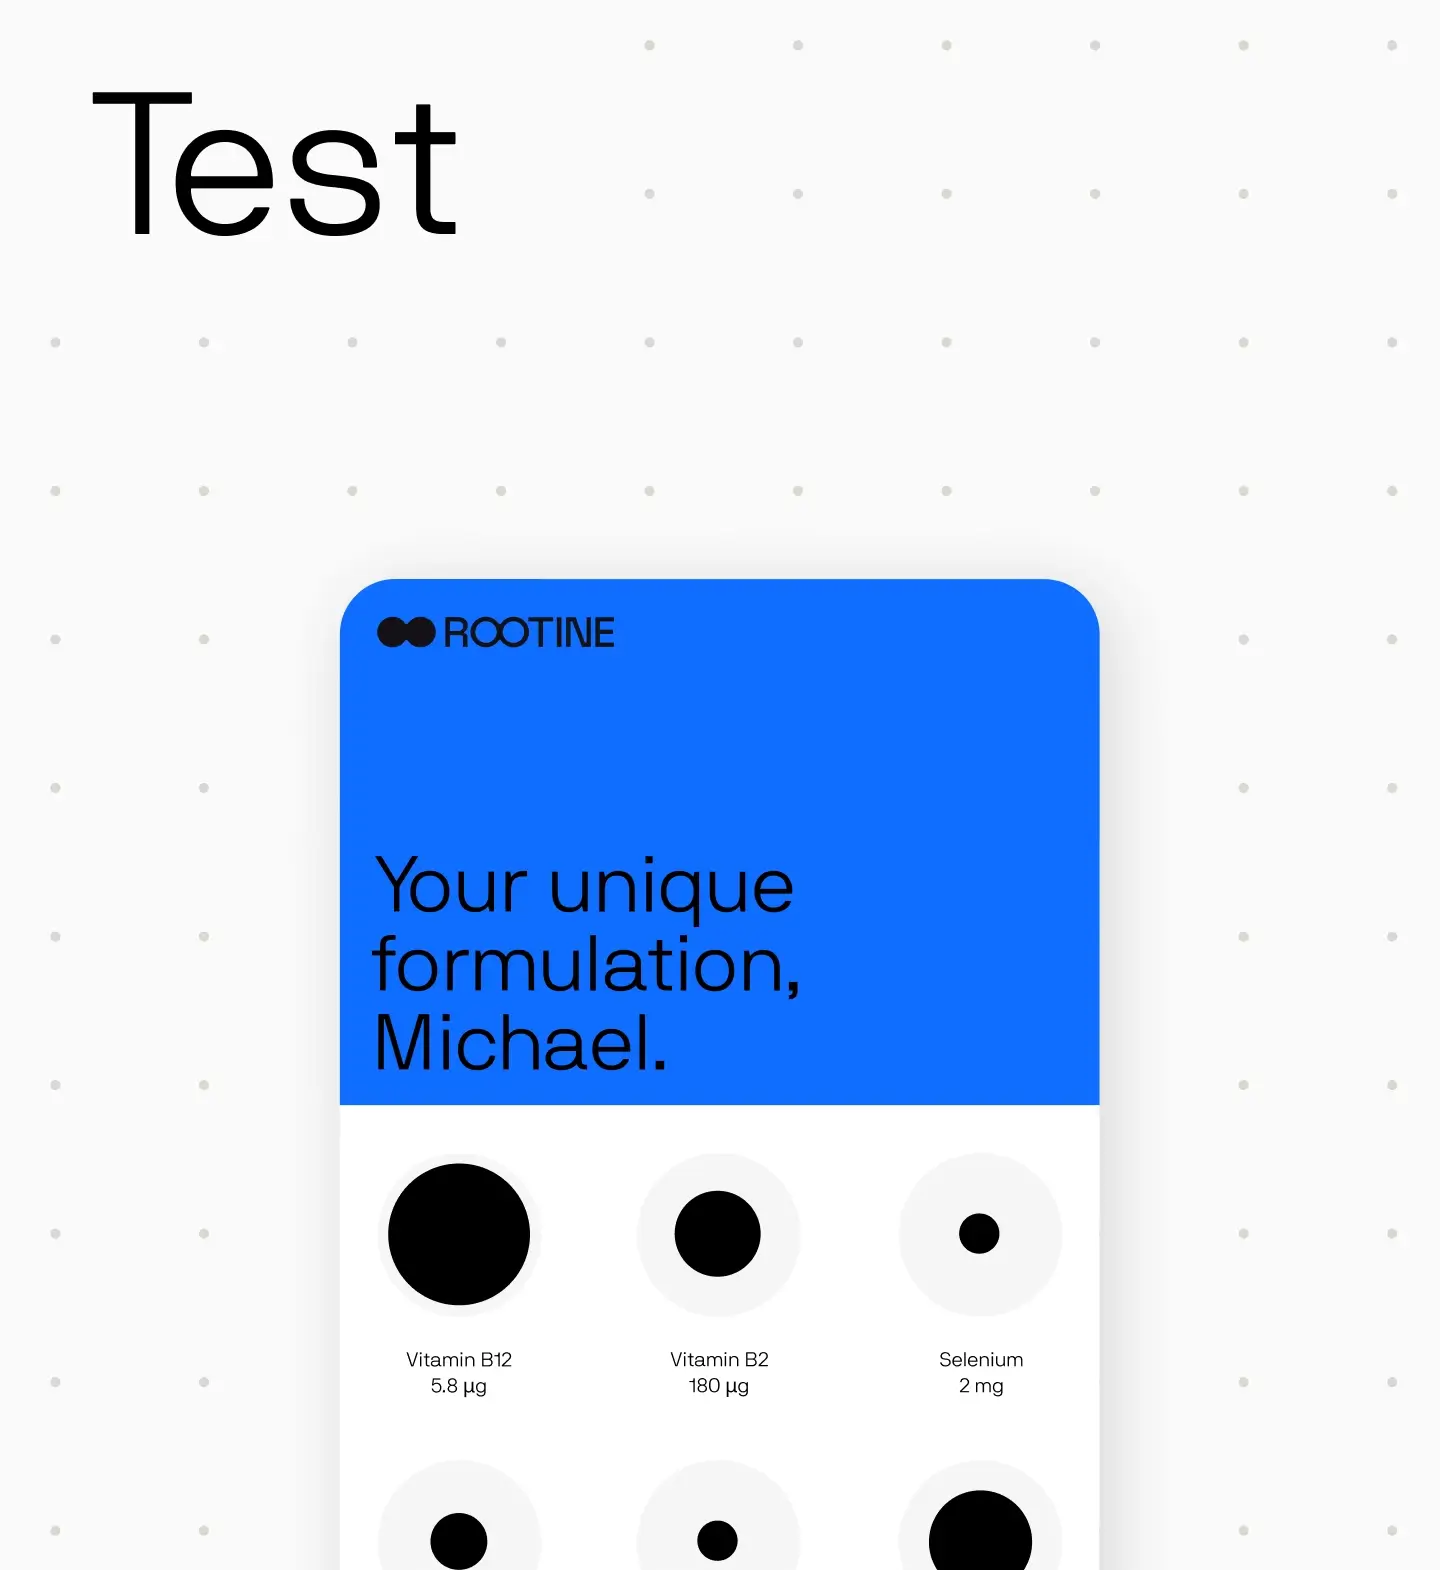 Data visualization of test results